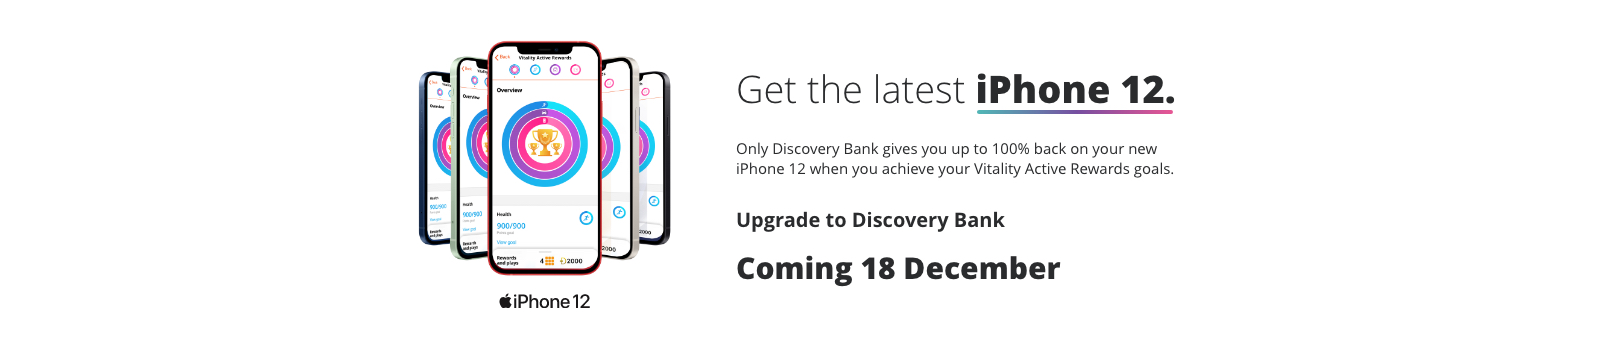 discovery bank iphone 12